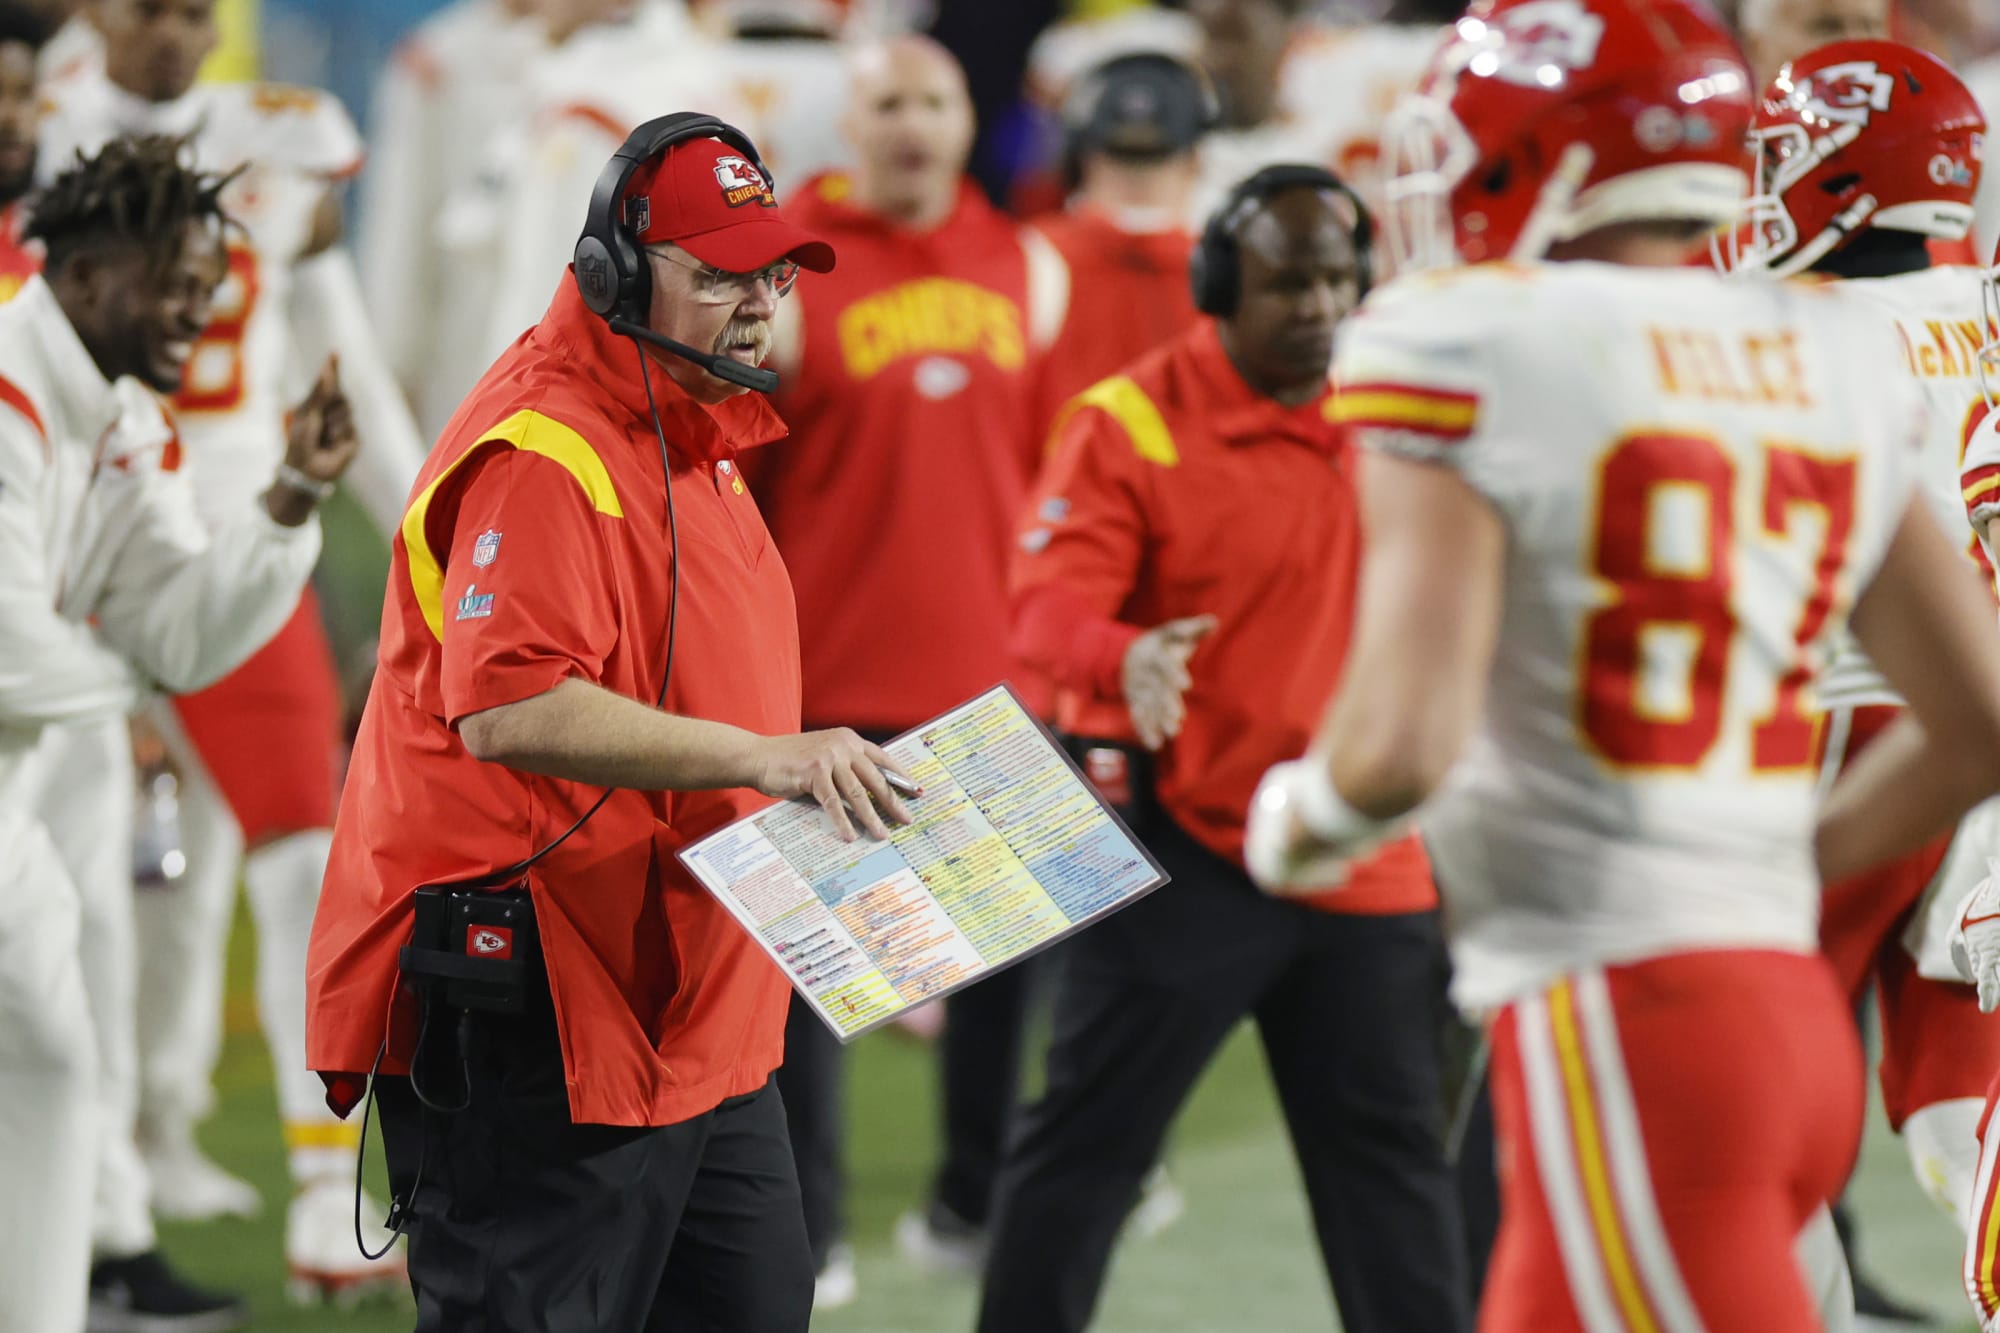 Andy Reid threatened to bench Chiefs players if they watched Rihanna